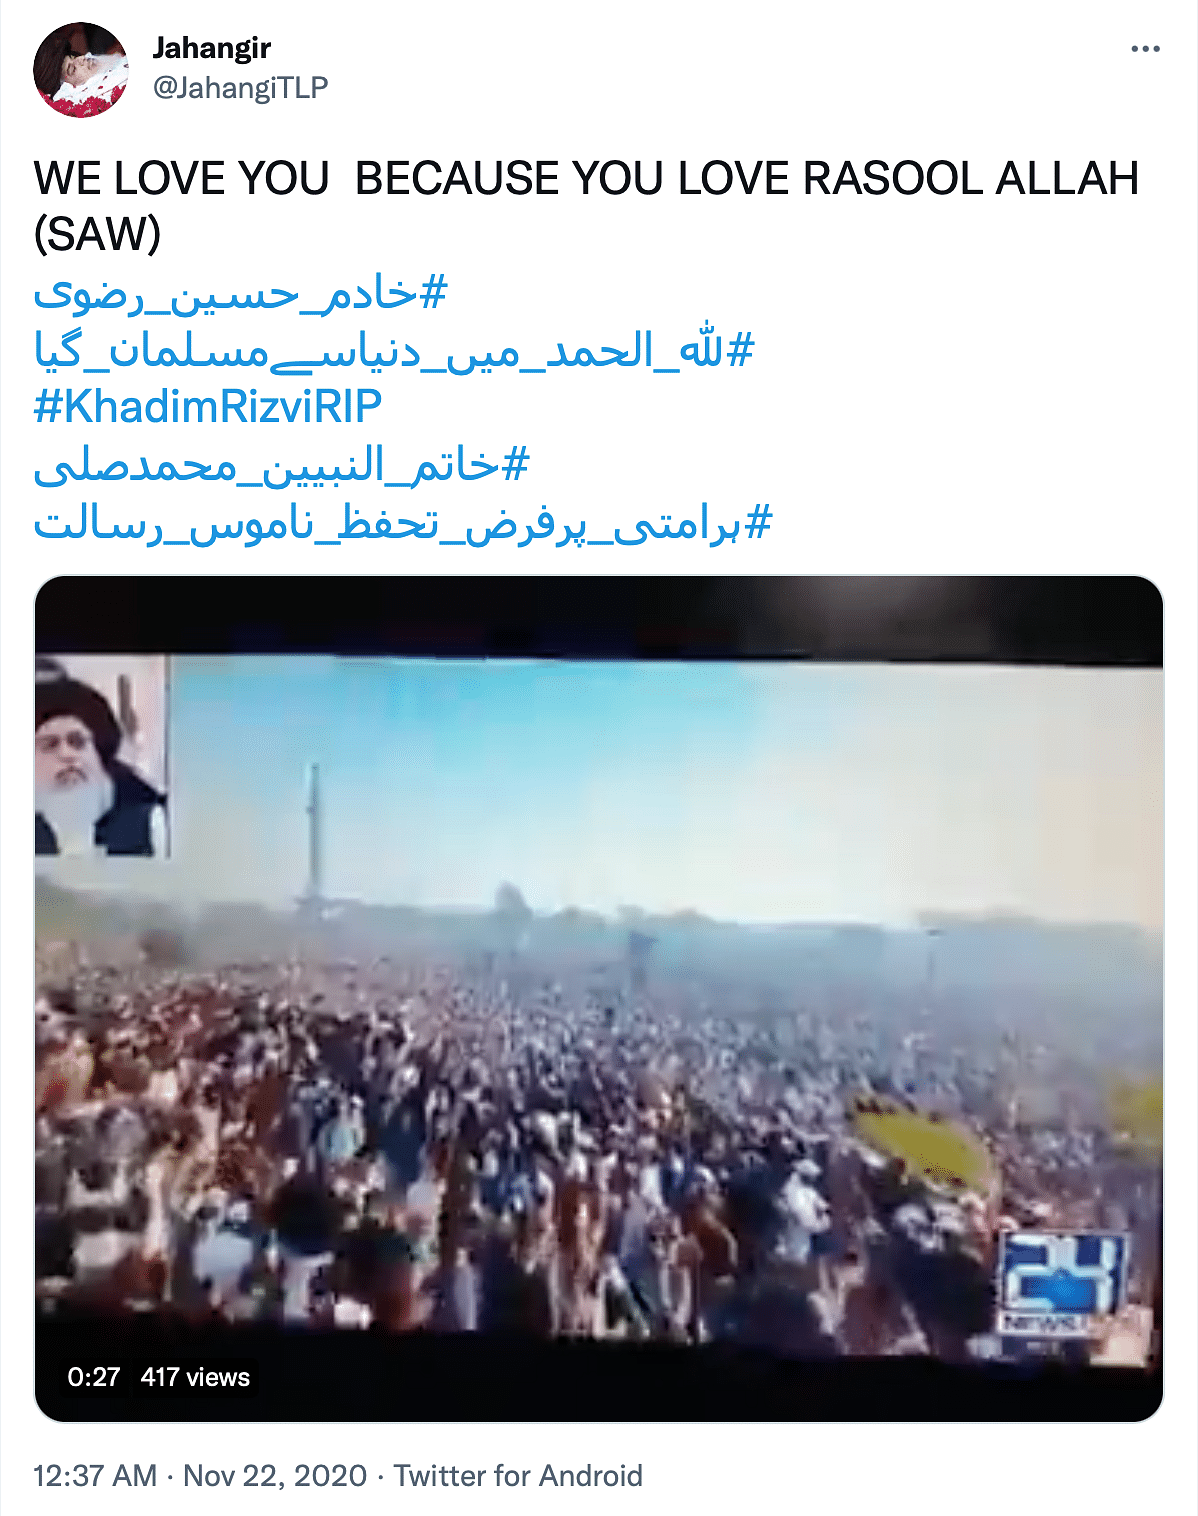 The video is from November 2020 when a huge crowd turned up for the funeral prayers of TLP chief Khadim Rizvi. 